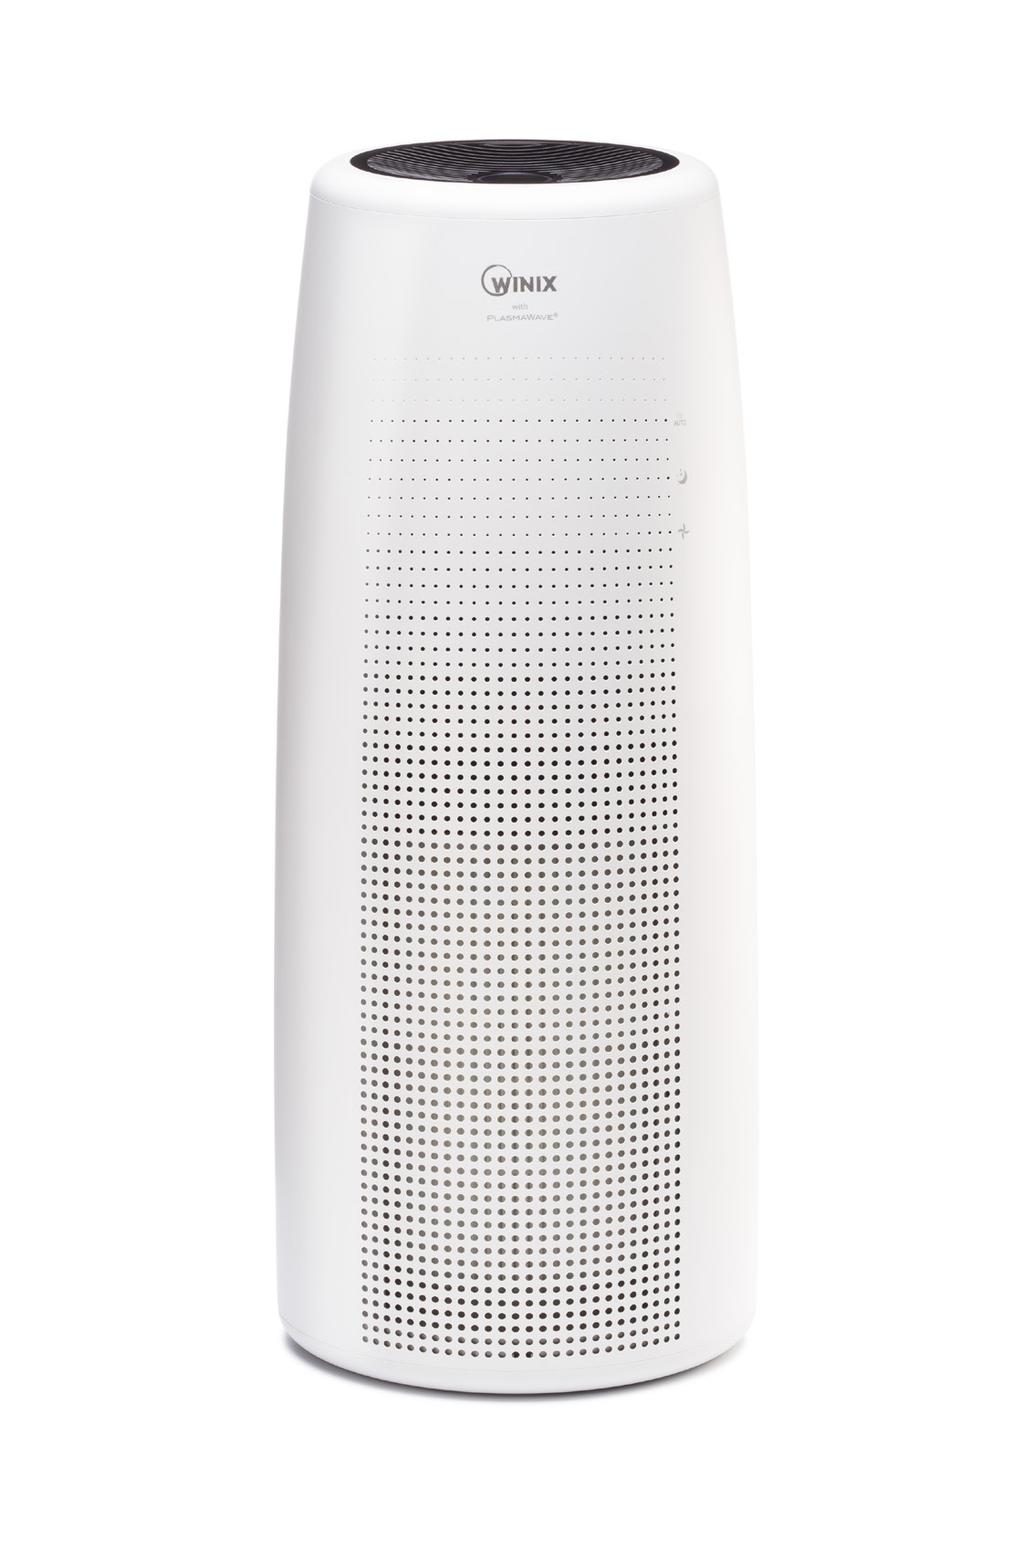 AIR PURIFIERS WINIX NK100 The WINIX NK100 Air Purifier combines a modern design and a 4-stage cleaning system to give the consumer an outstanding product.